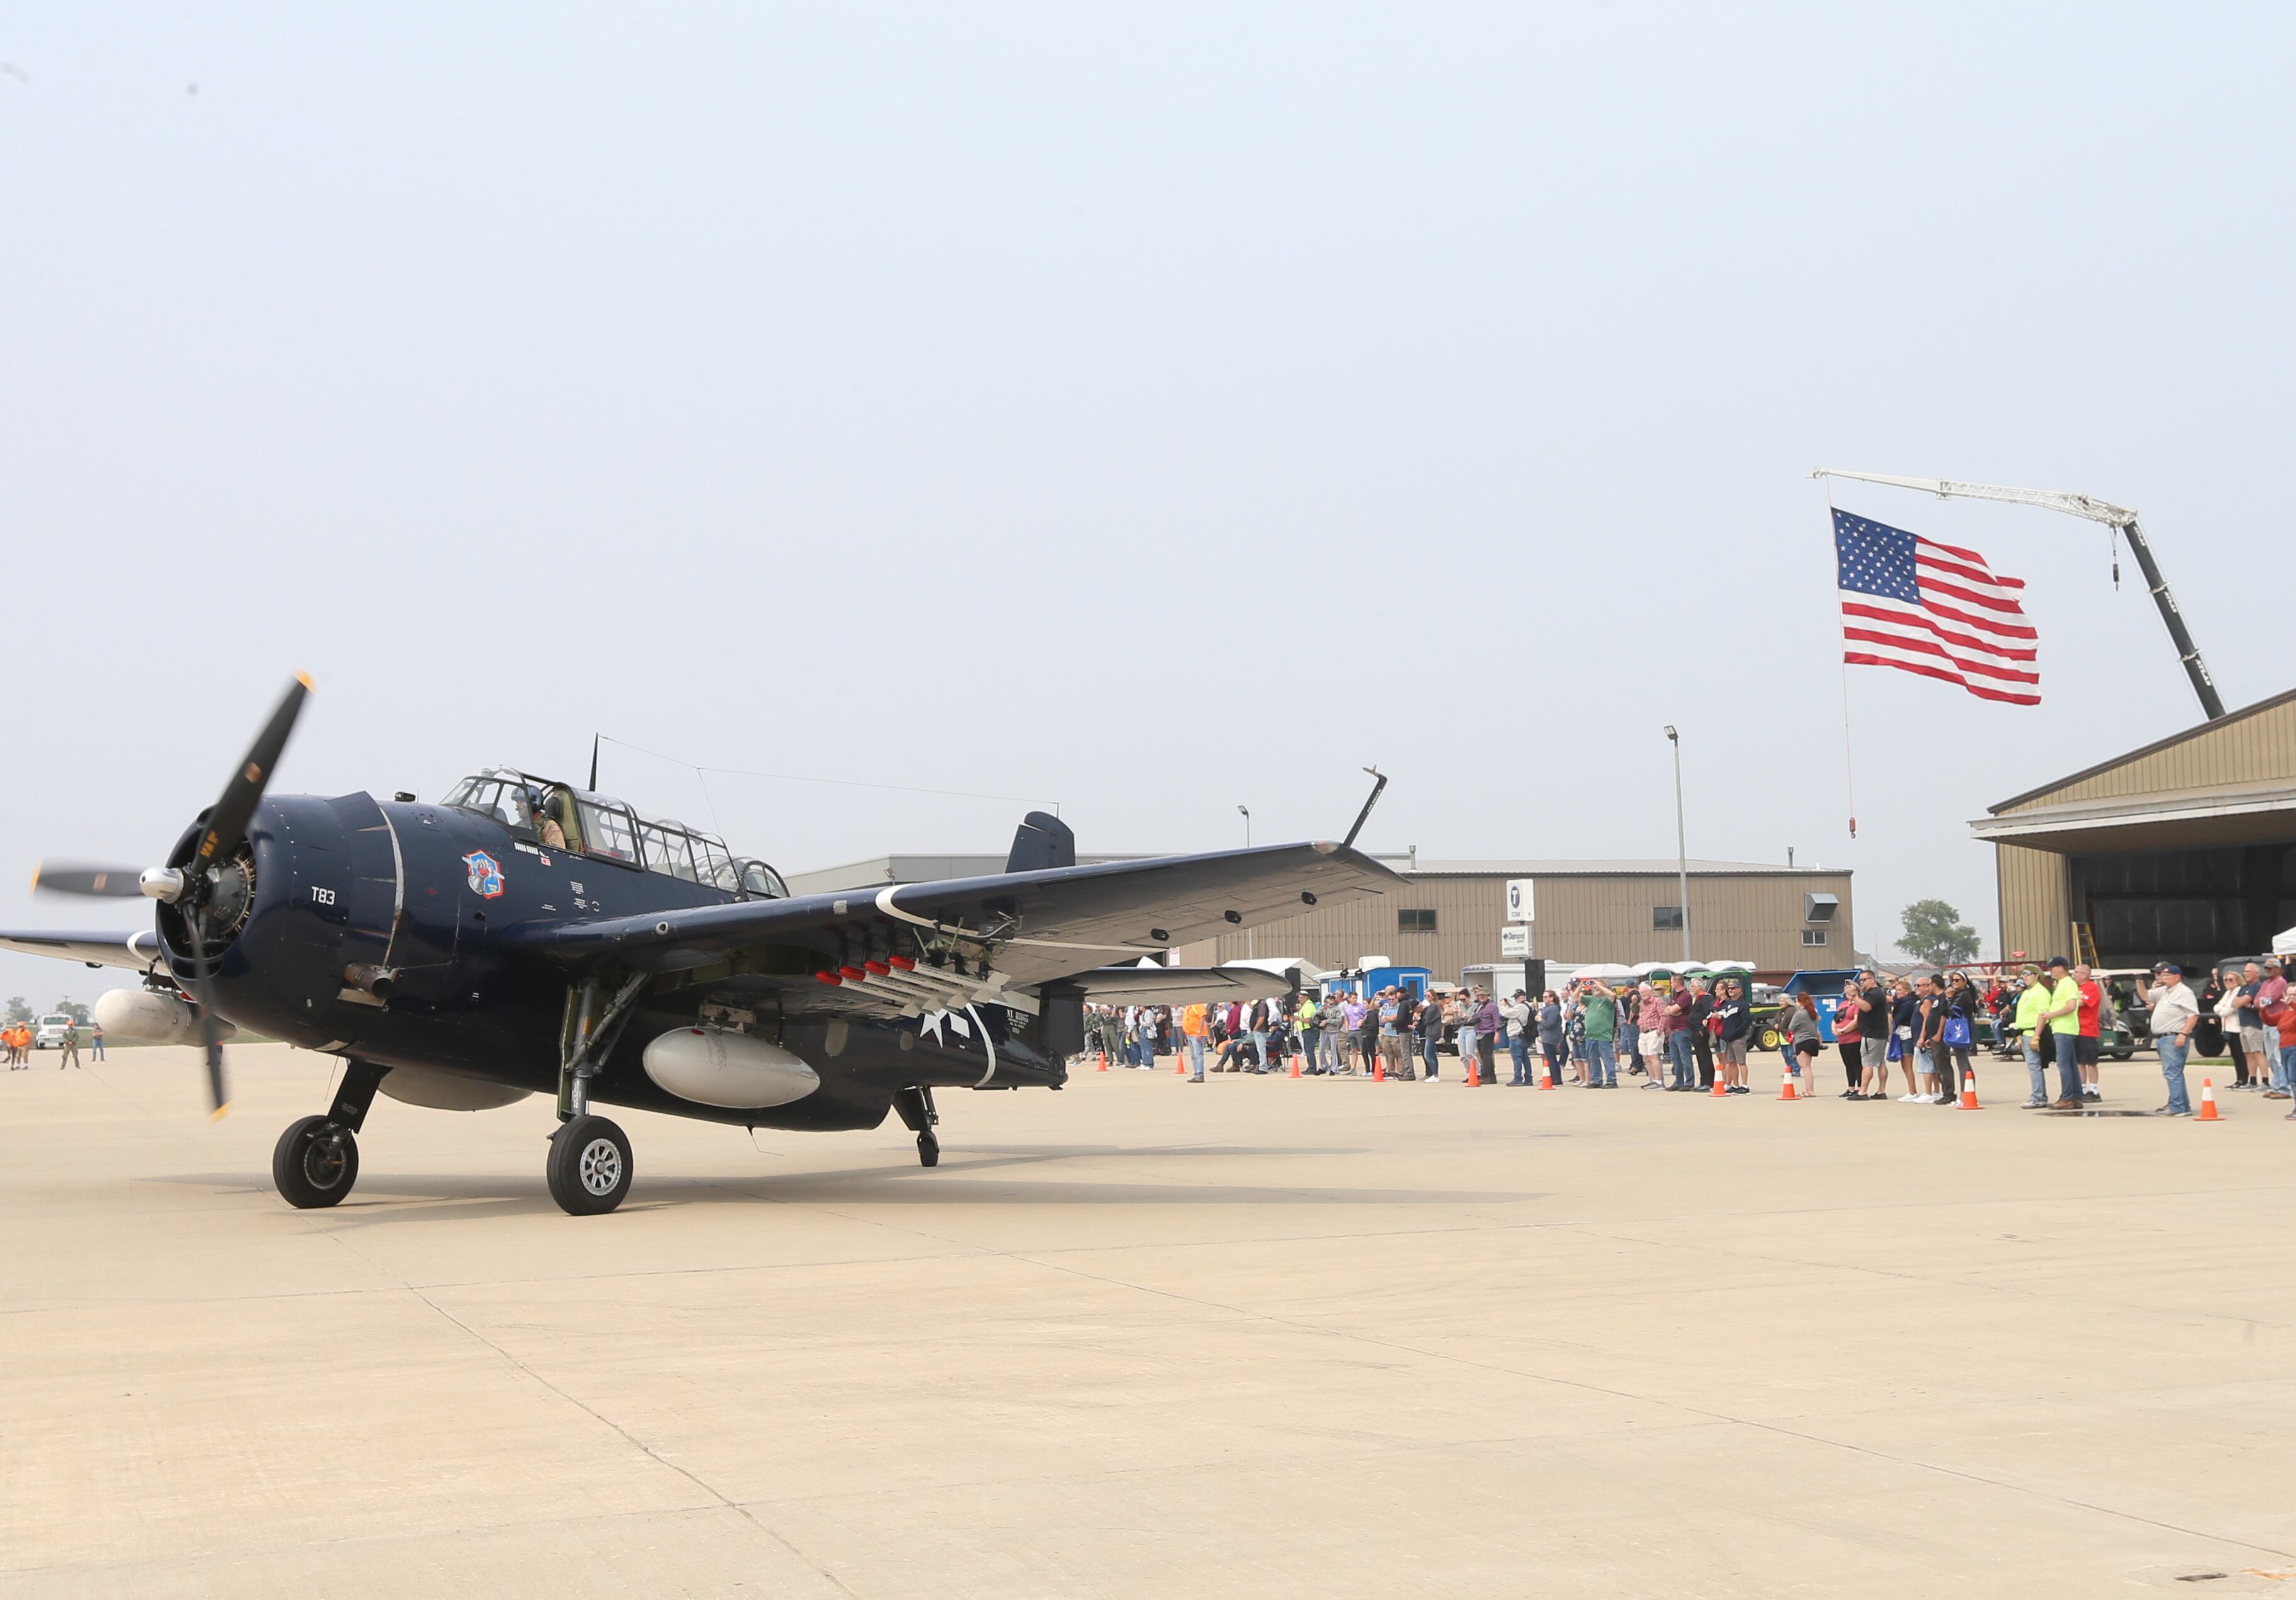 A TBM Avenger flown by pilot Brad Deckert departs for the runway during the TBM Avenger Reunion on Friday, May 19, 2023 at the Illinois Valley Regional Airport in Peru.